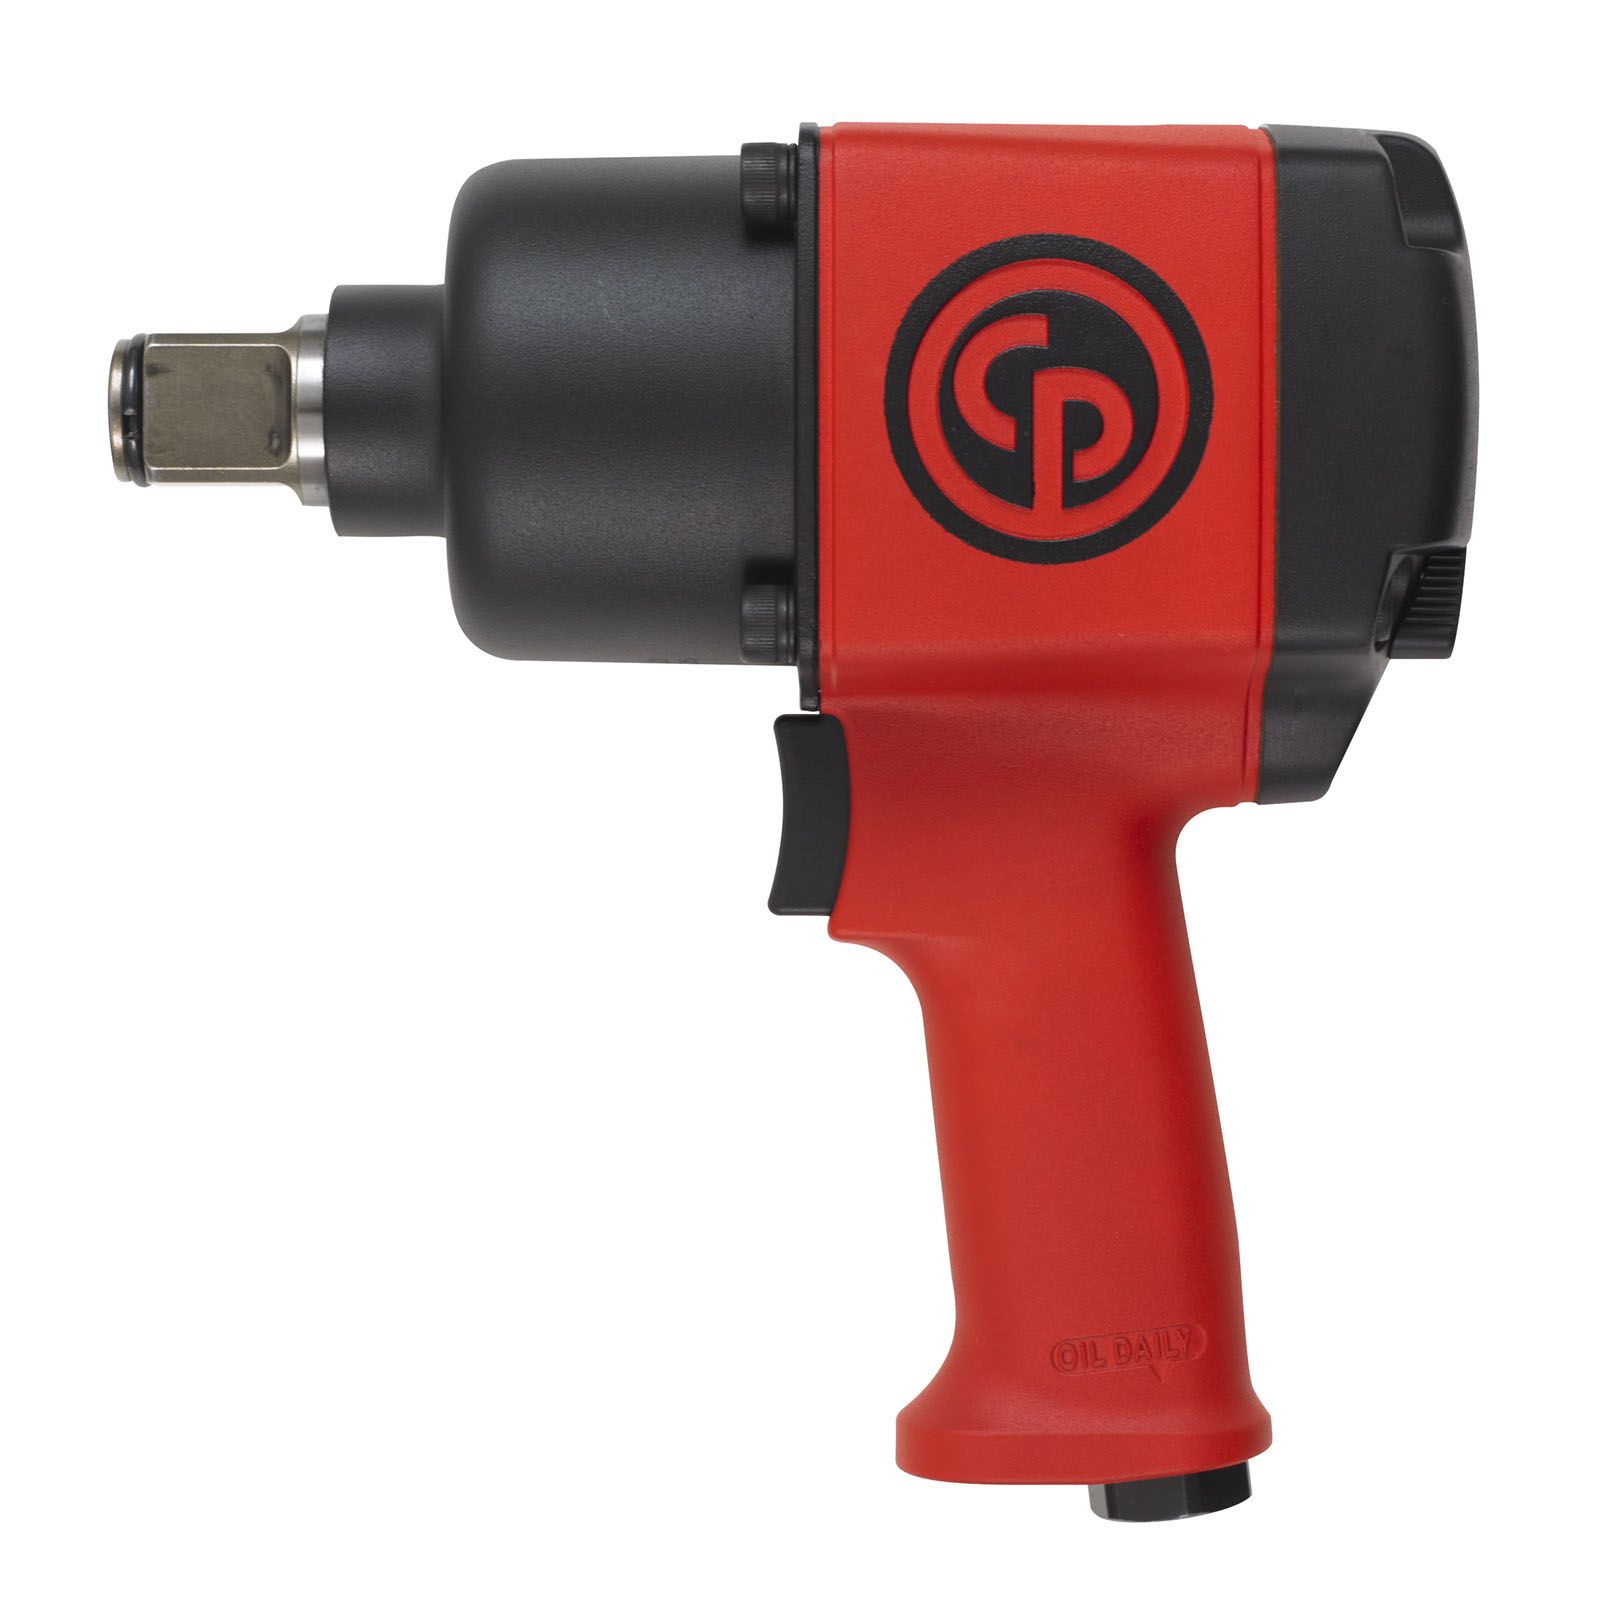 CP6773+TUNE UP KIT IMPACT WRENCH PROMO foto de producto